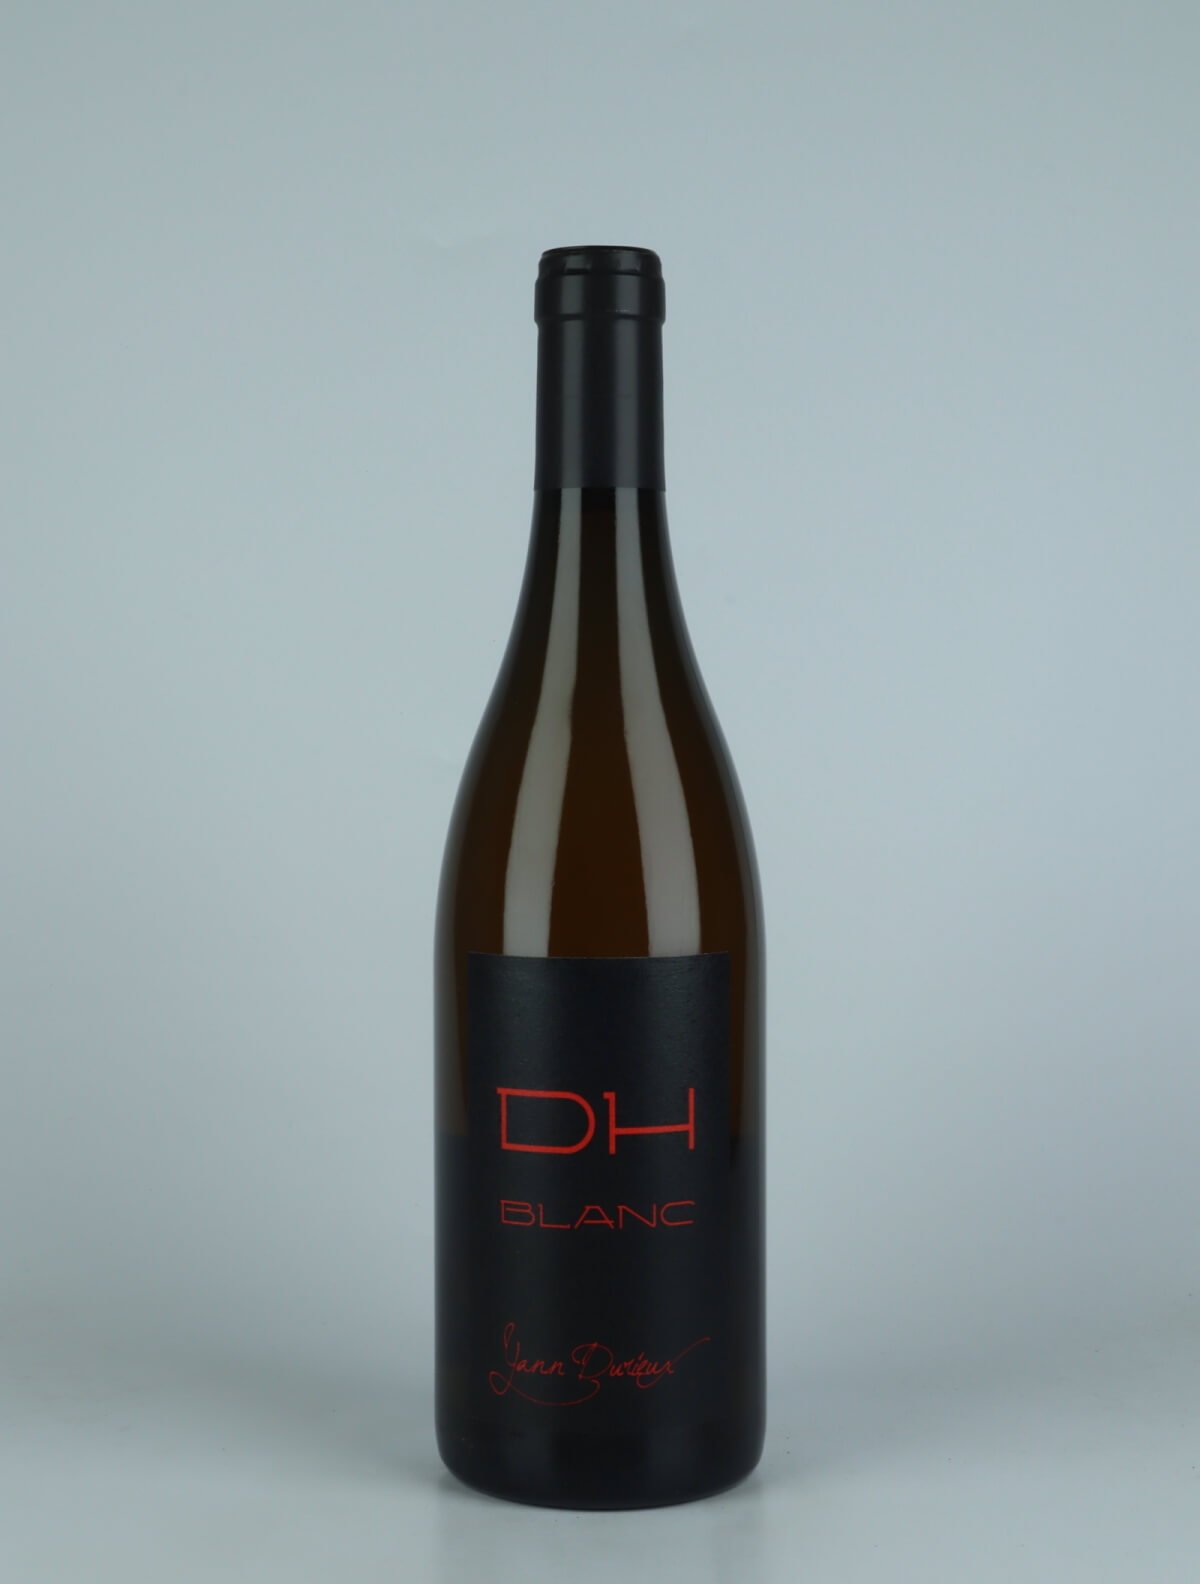 A bottle 2020 DH Blanc White wine from Yann Durieux, Burgundy in France